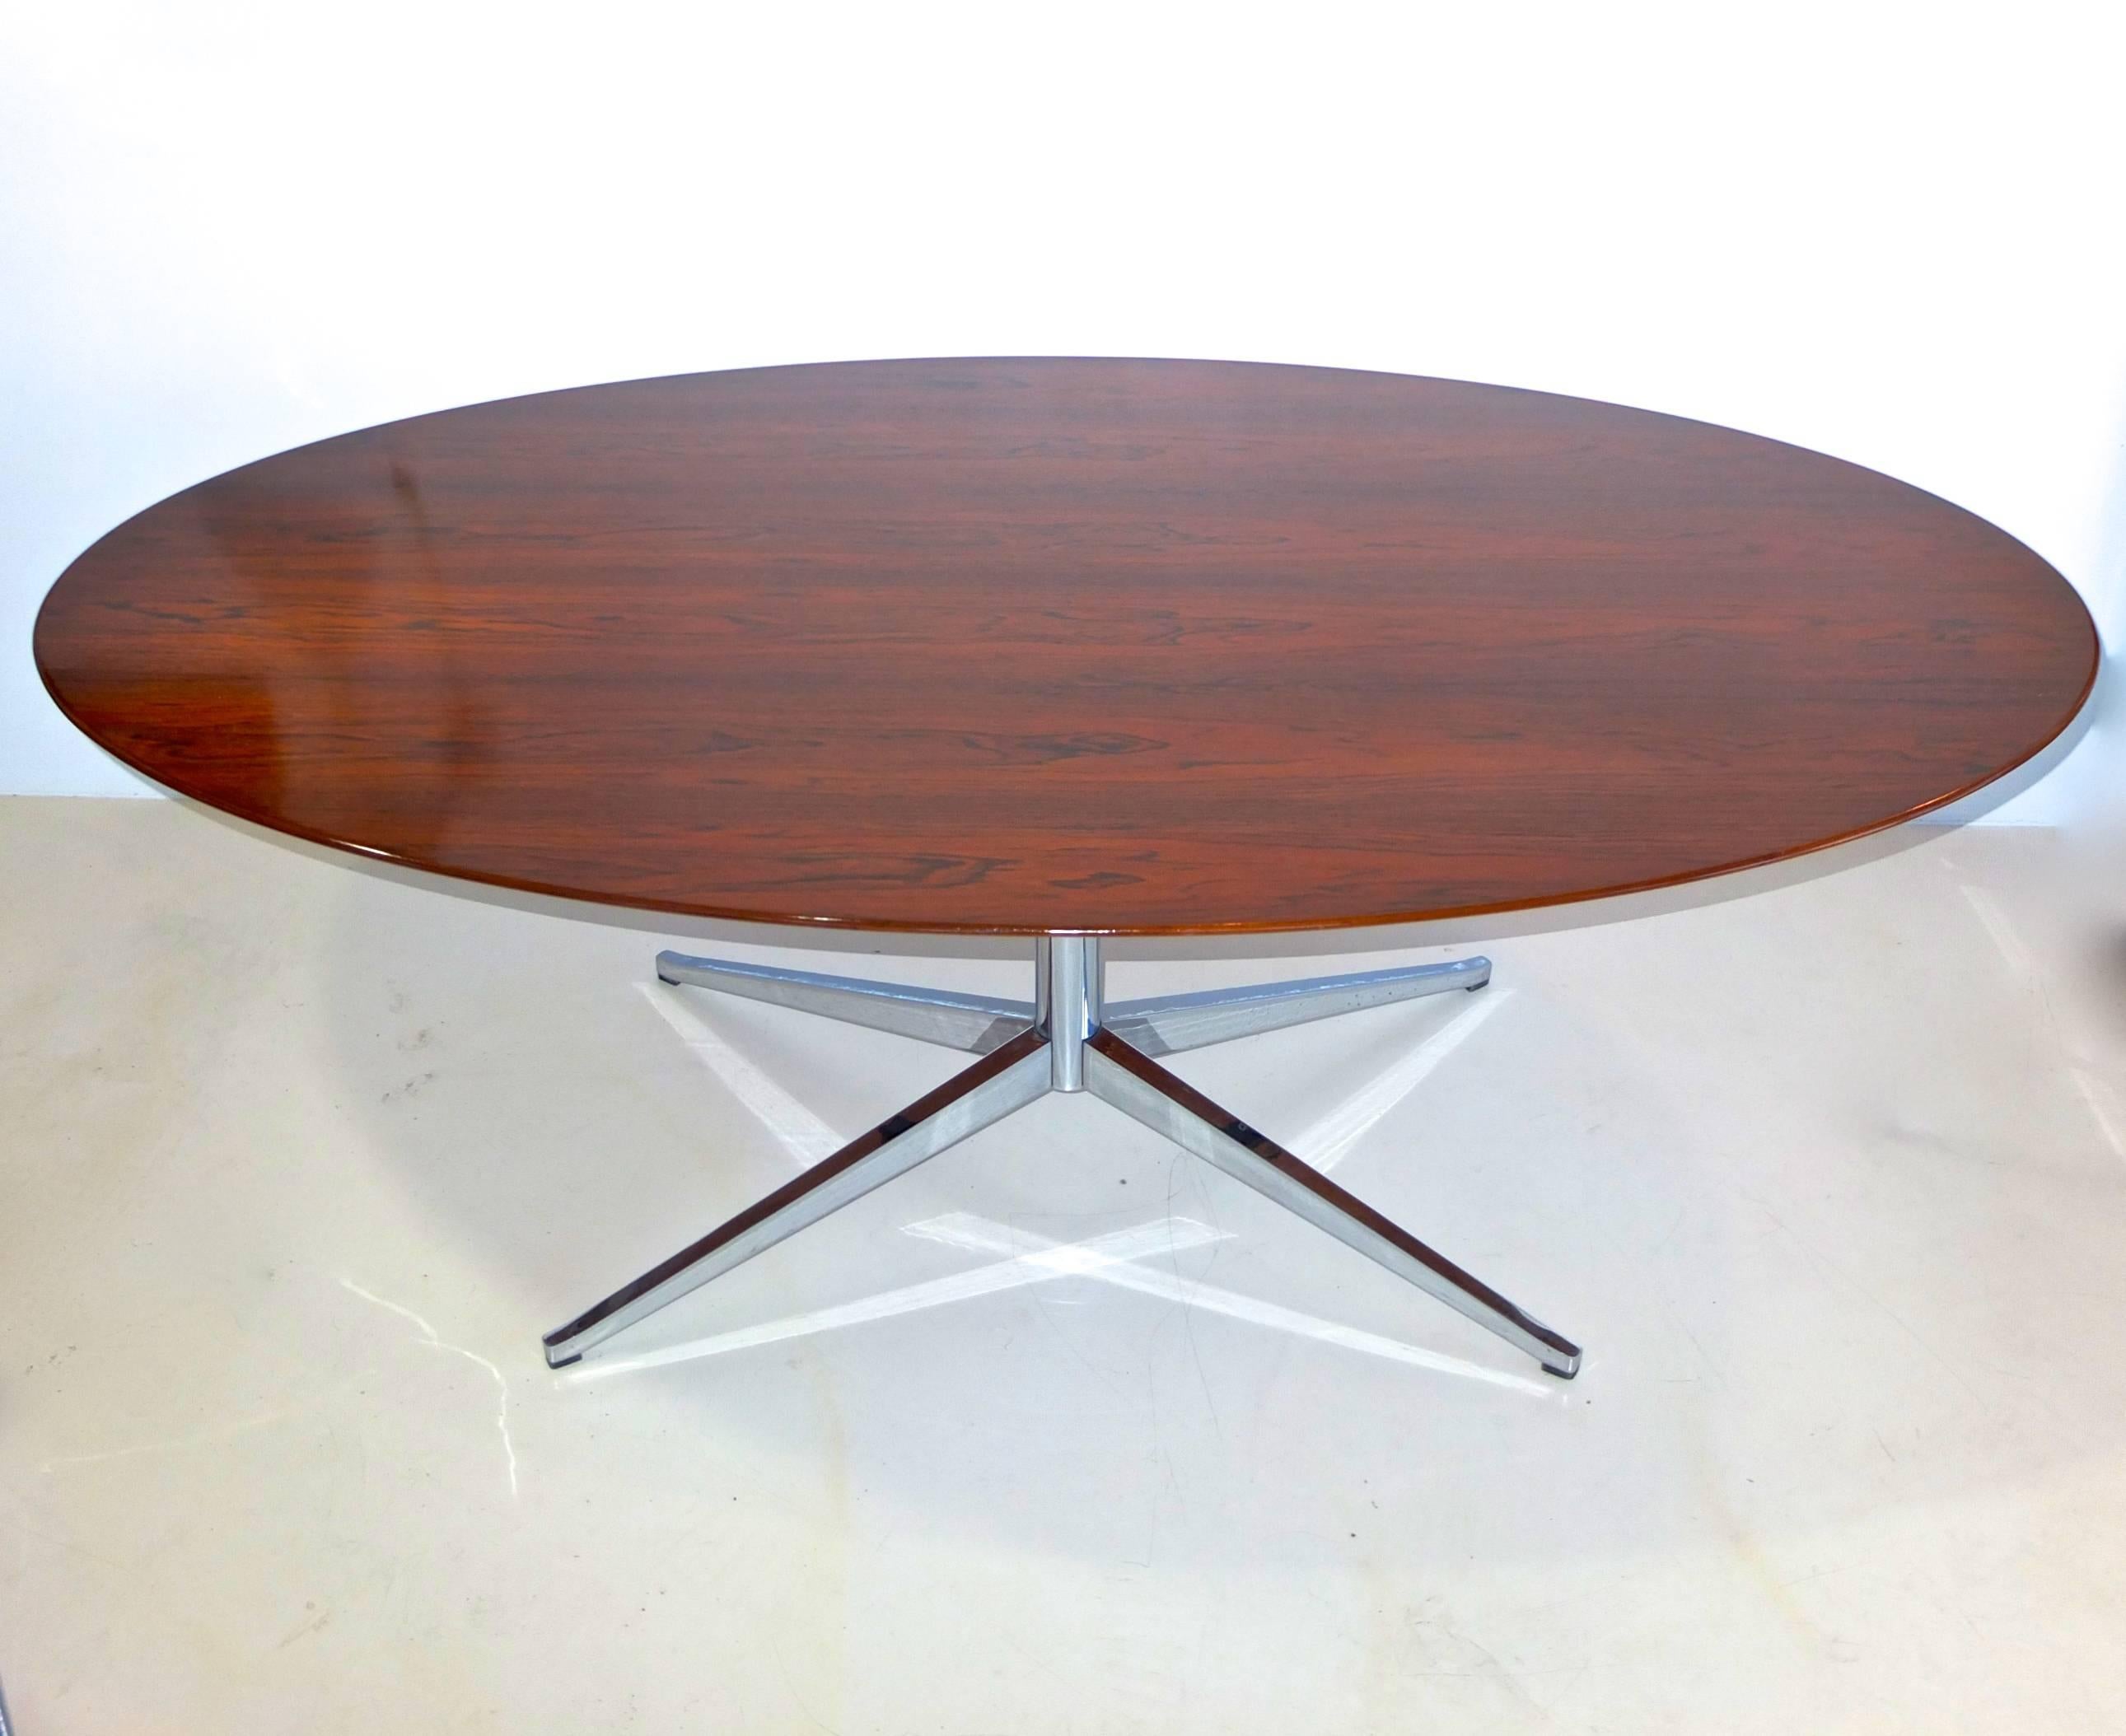 Florence knoll oval dining table or desk in Brazilian rosewood on polished steel pedestal and four star base.

Original knoll label on underside. 

Restored and ready to use.

Florence Knoll designed this iconic desk to free the executive